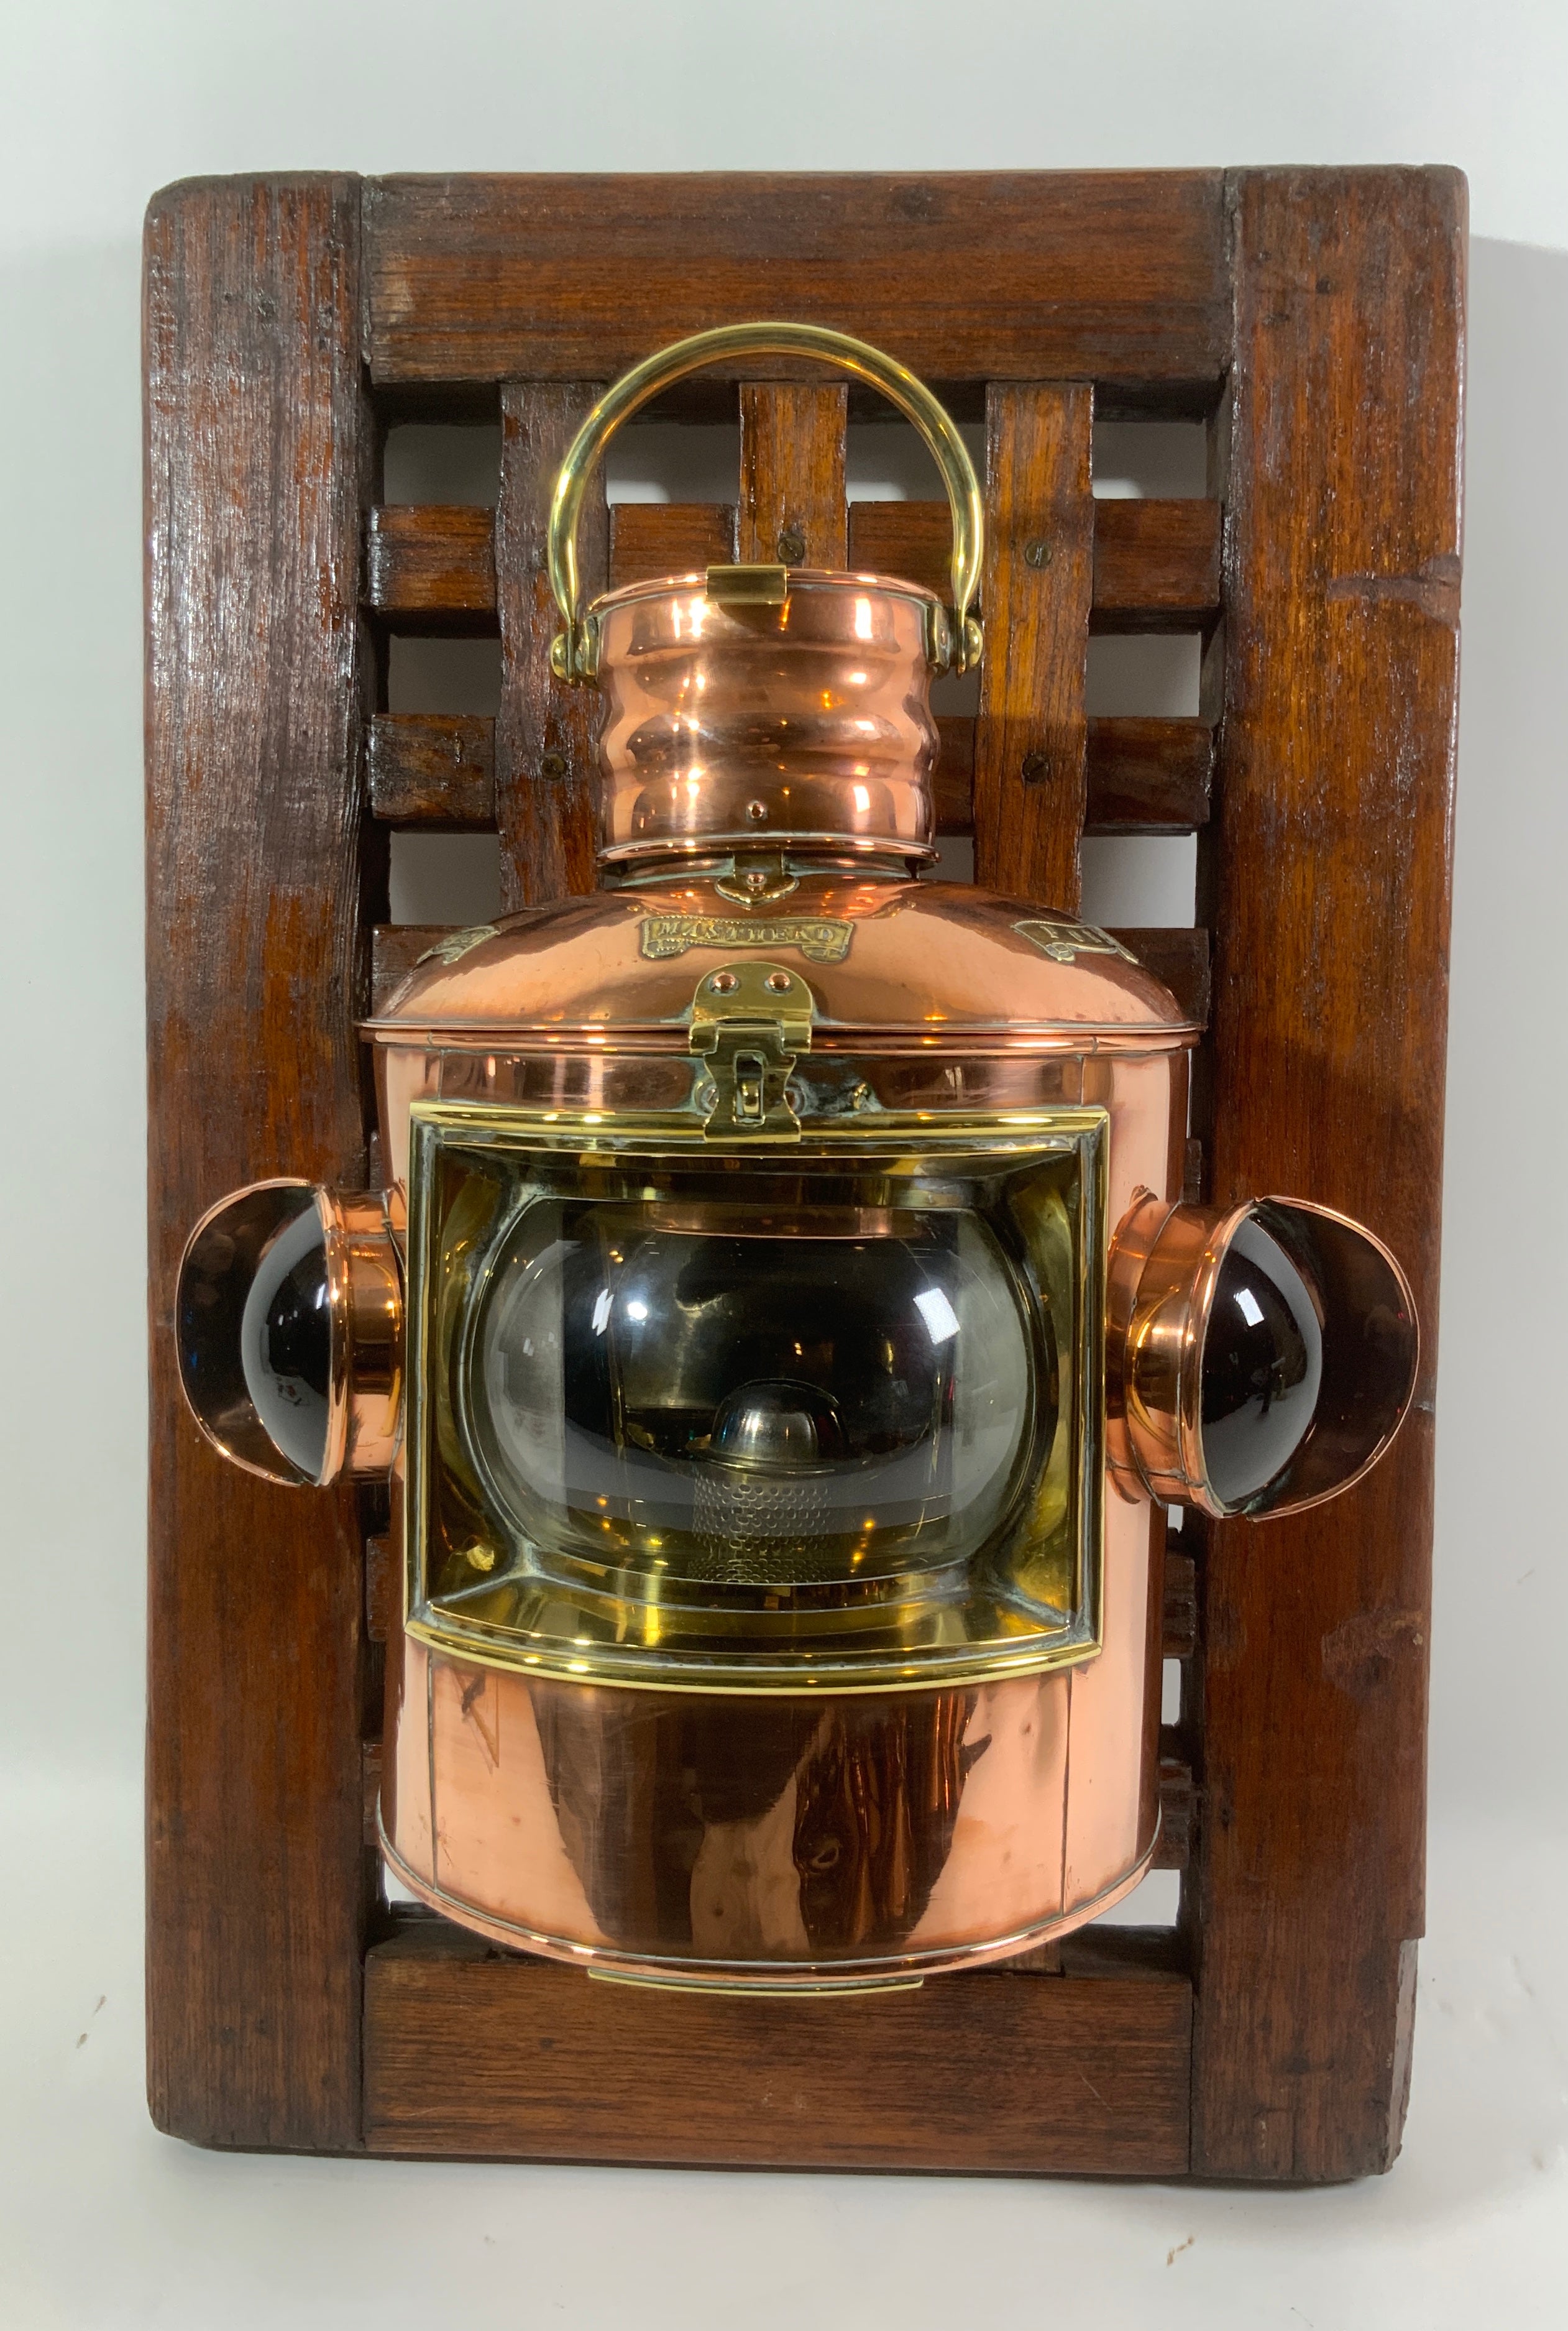 Ships Bow Lantern of Copper and Brass – Lannan Gallery